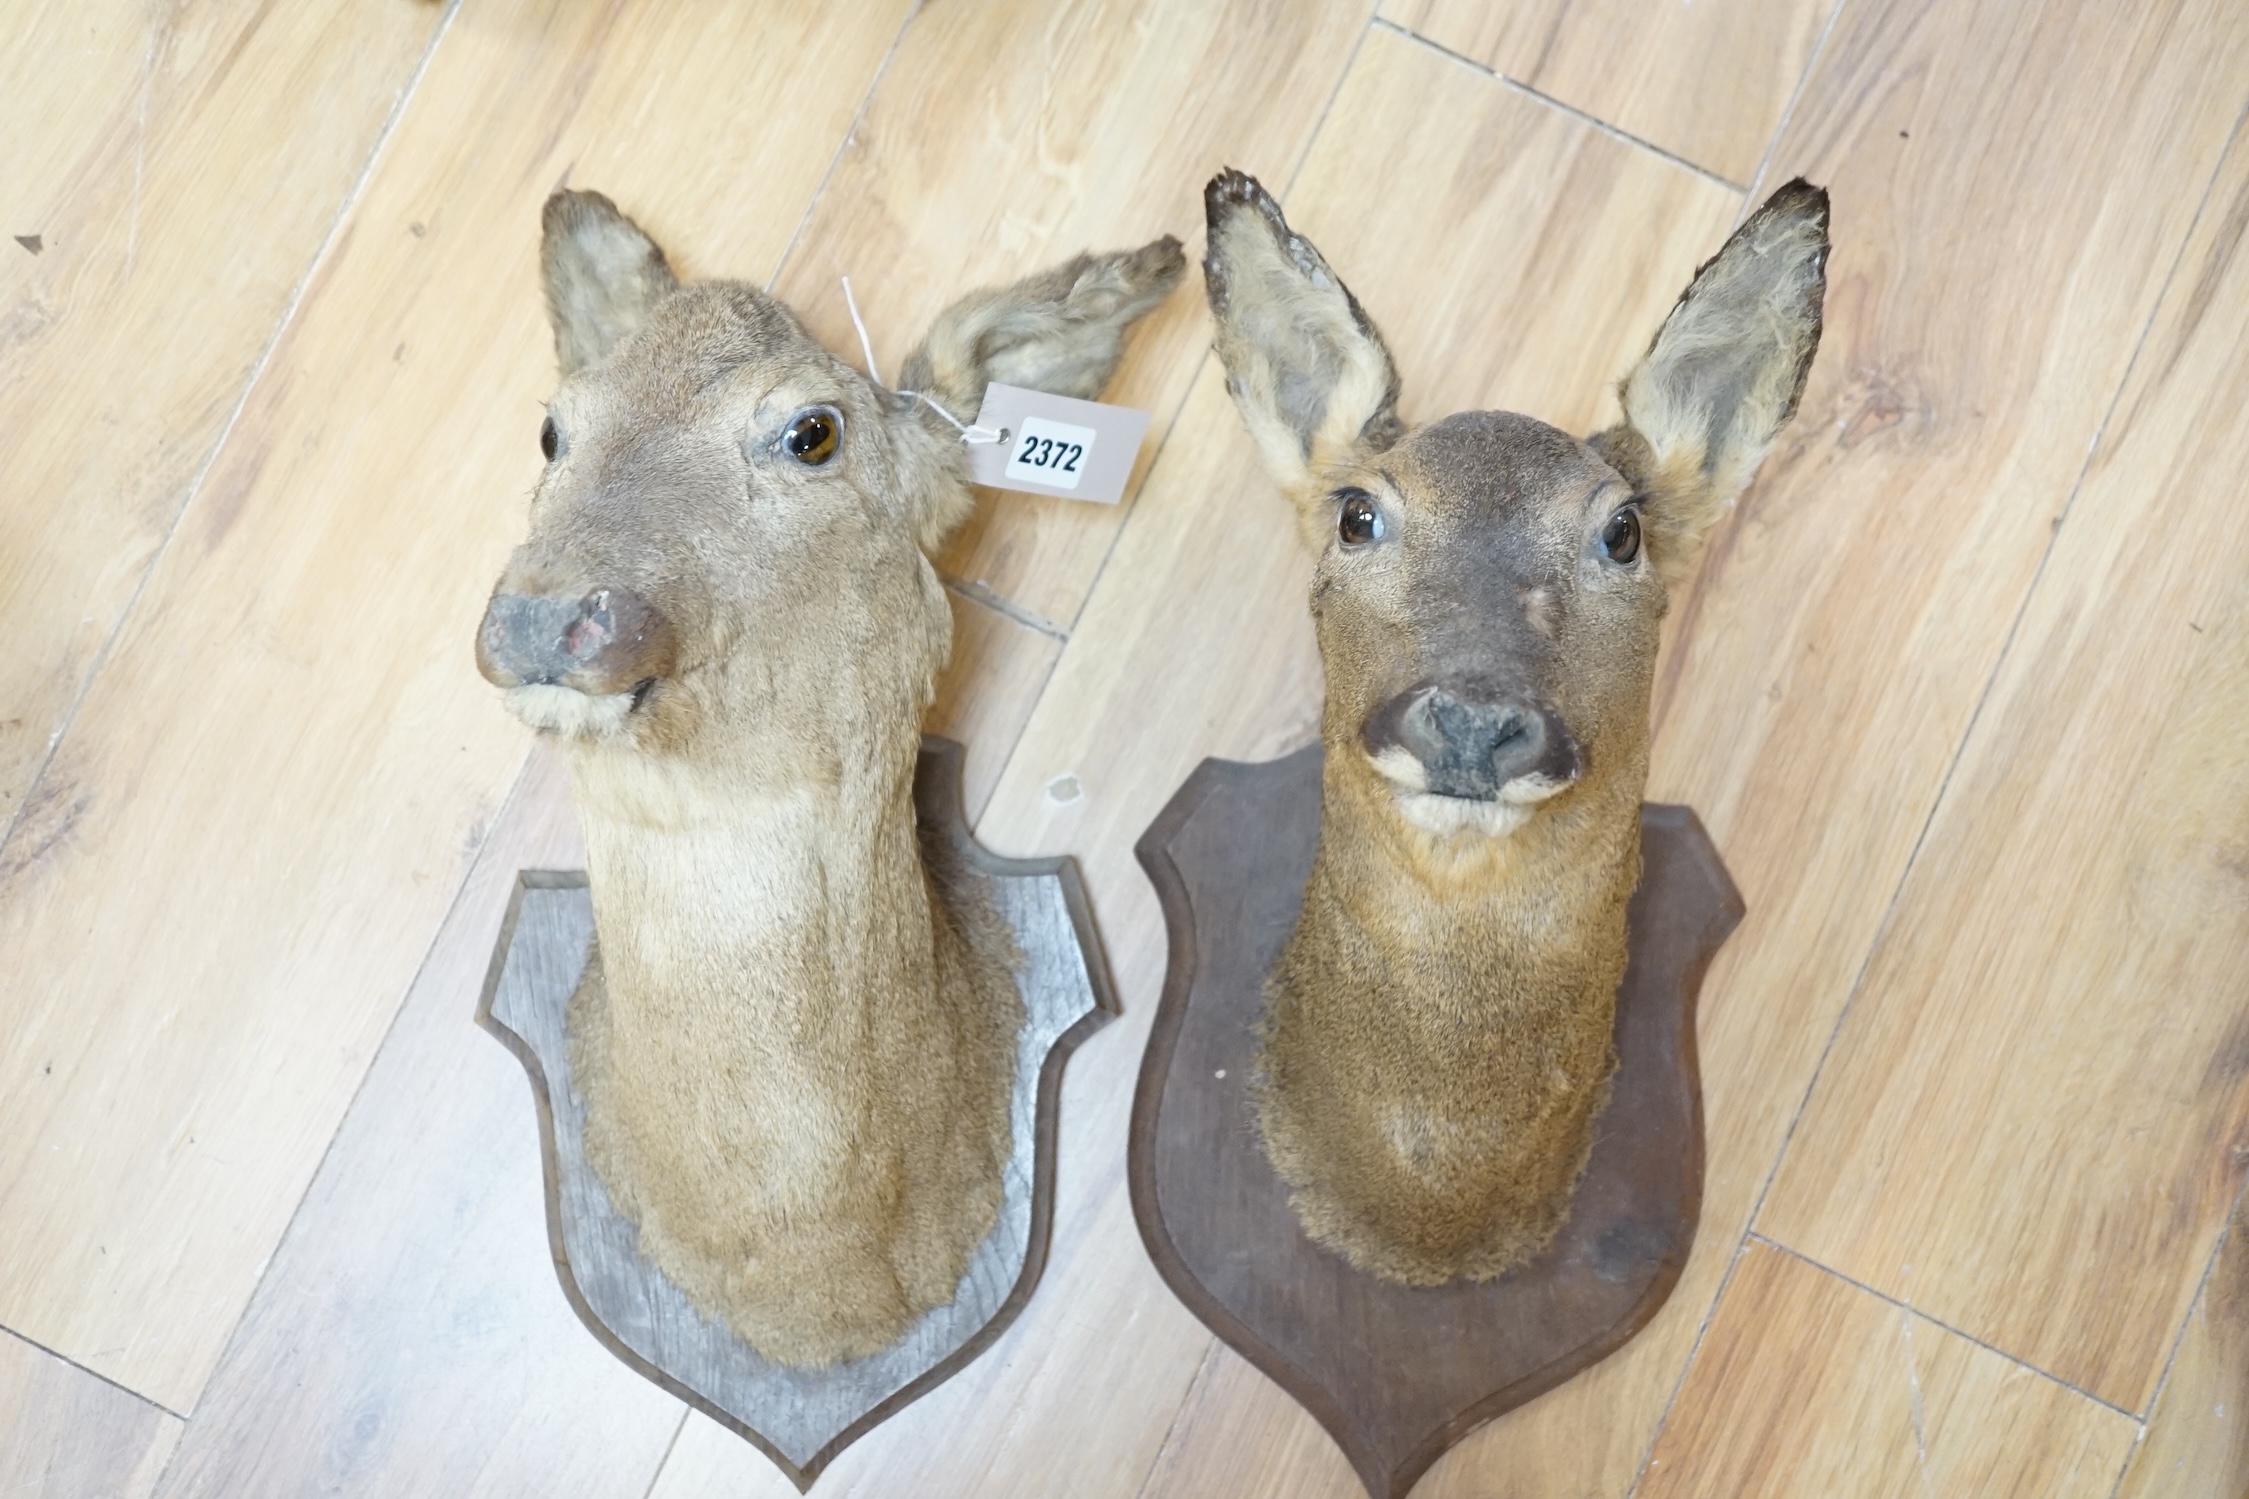 Two taxidermy mounted deer's heads